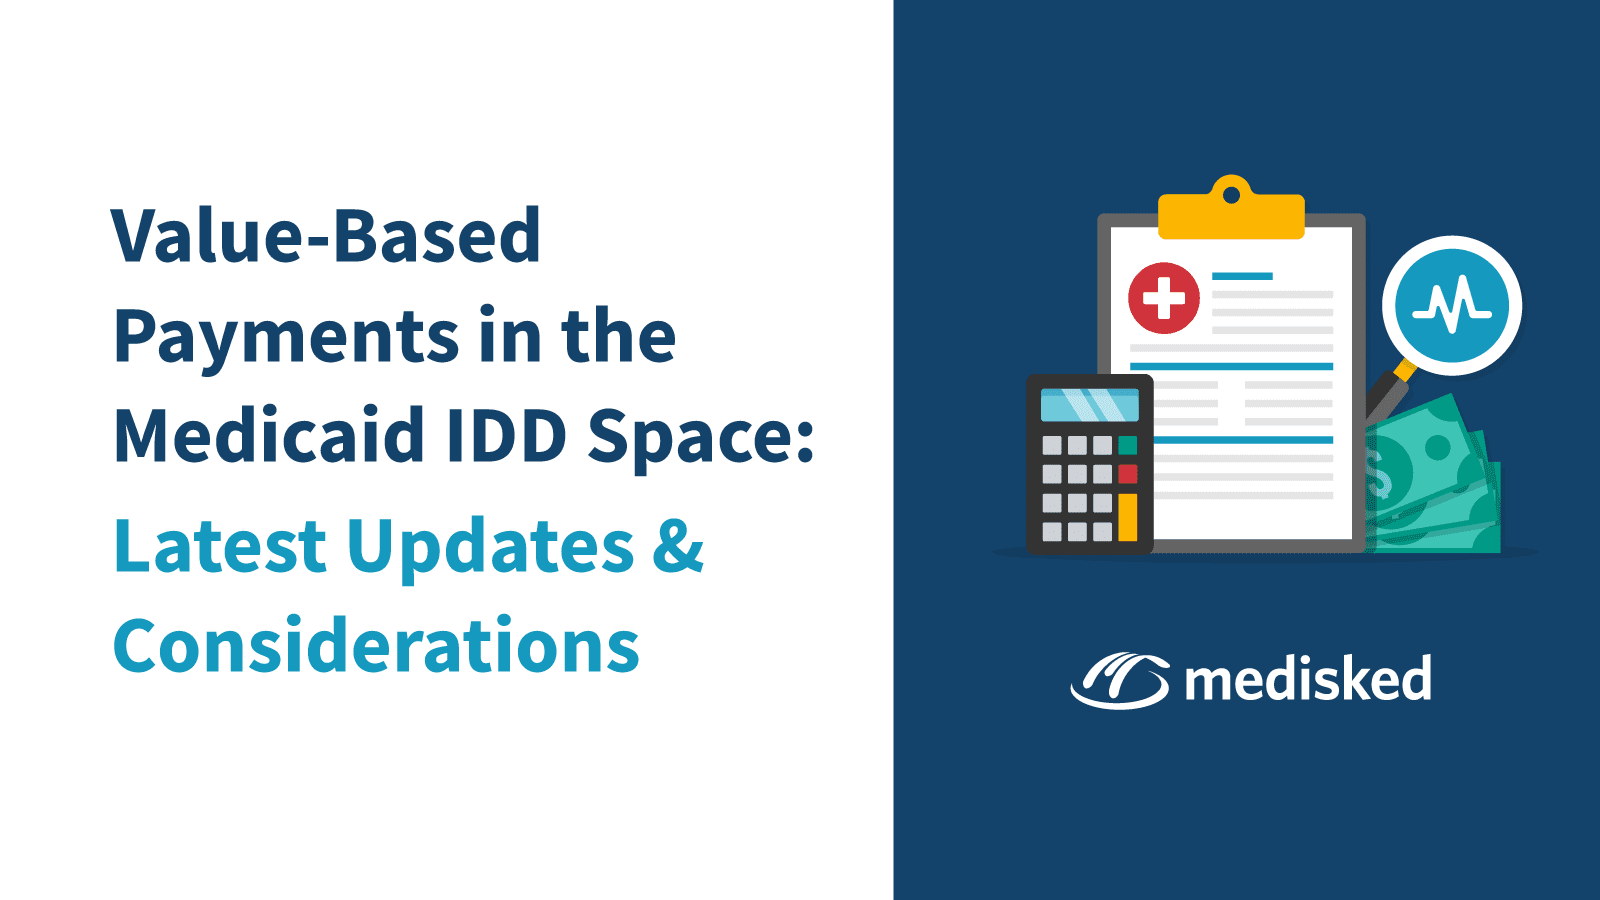 Value-Based Payments in the Medicaid IDD Space: Latest Updates and Considerations